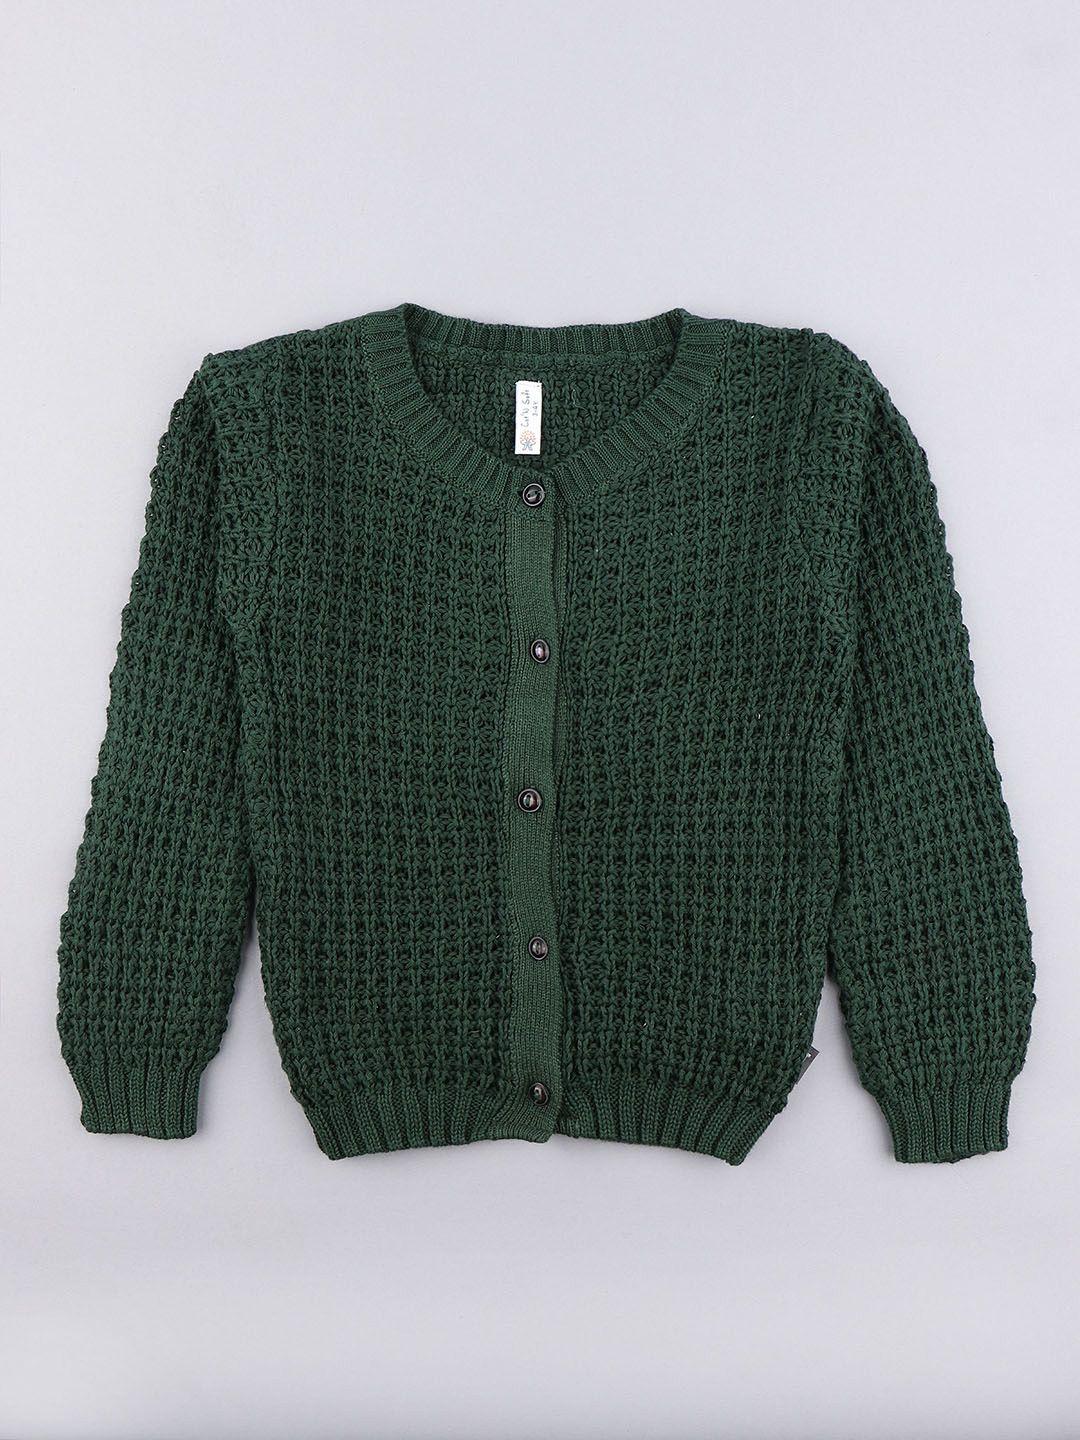 cot'n soft boys green cardigan with zip detail detail